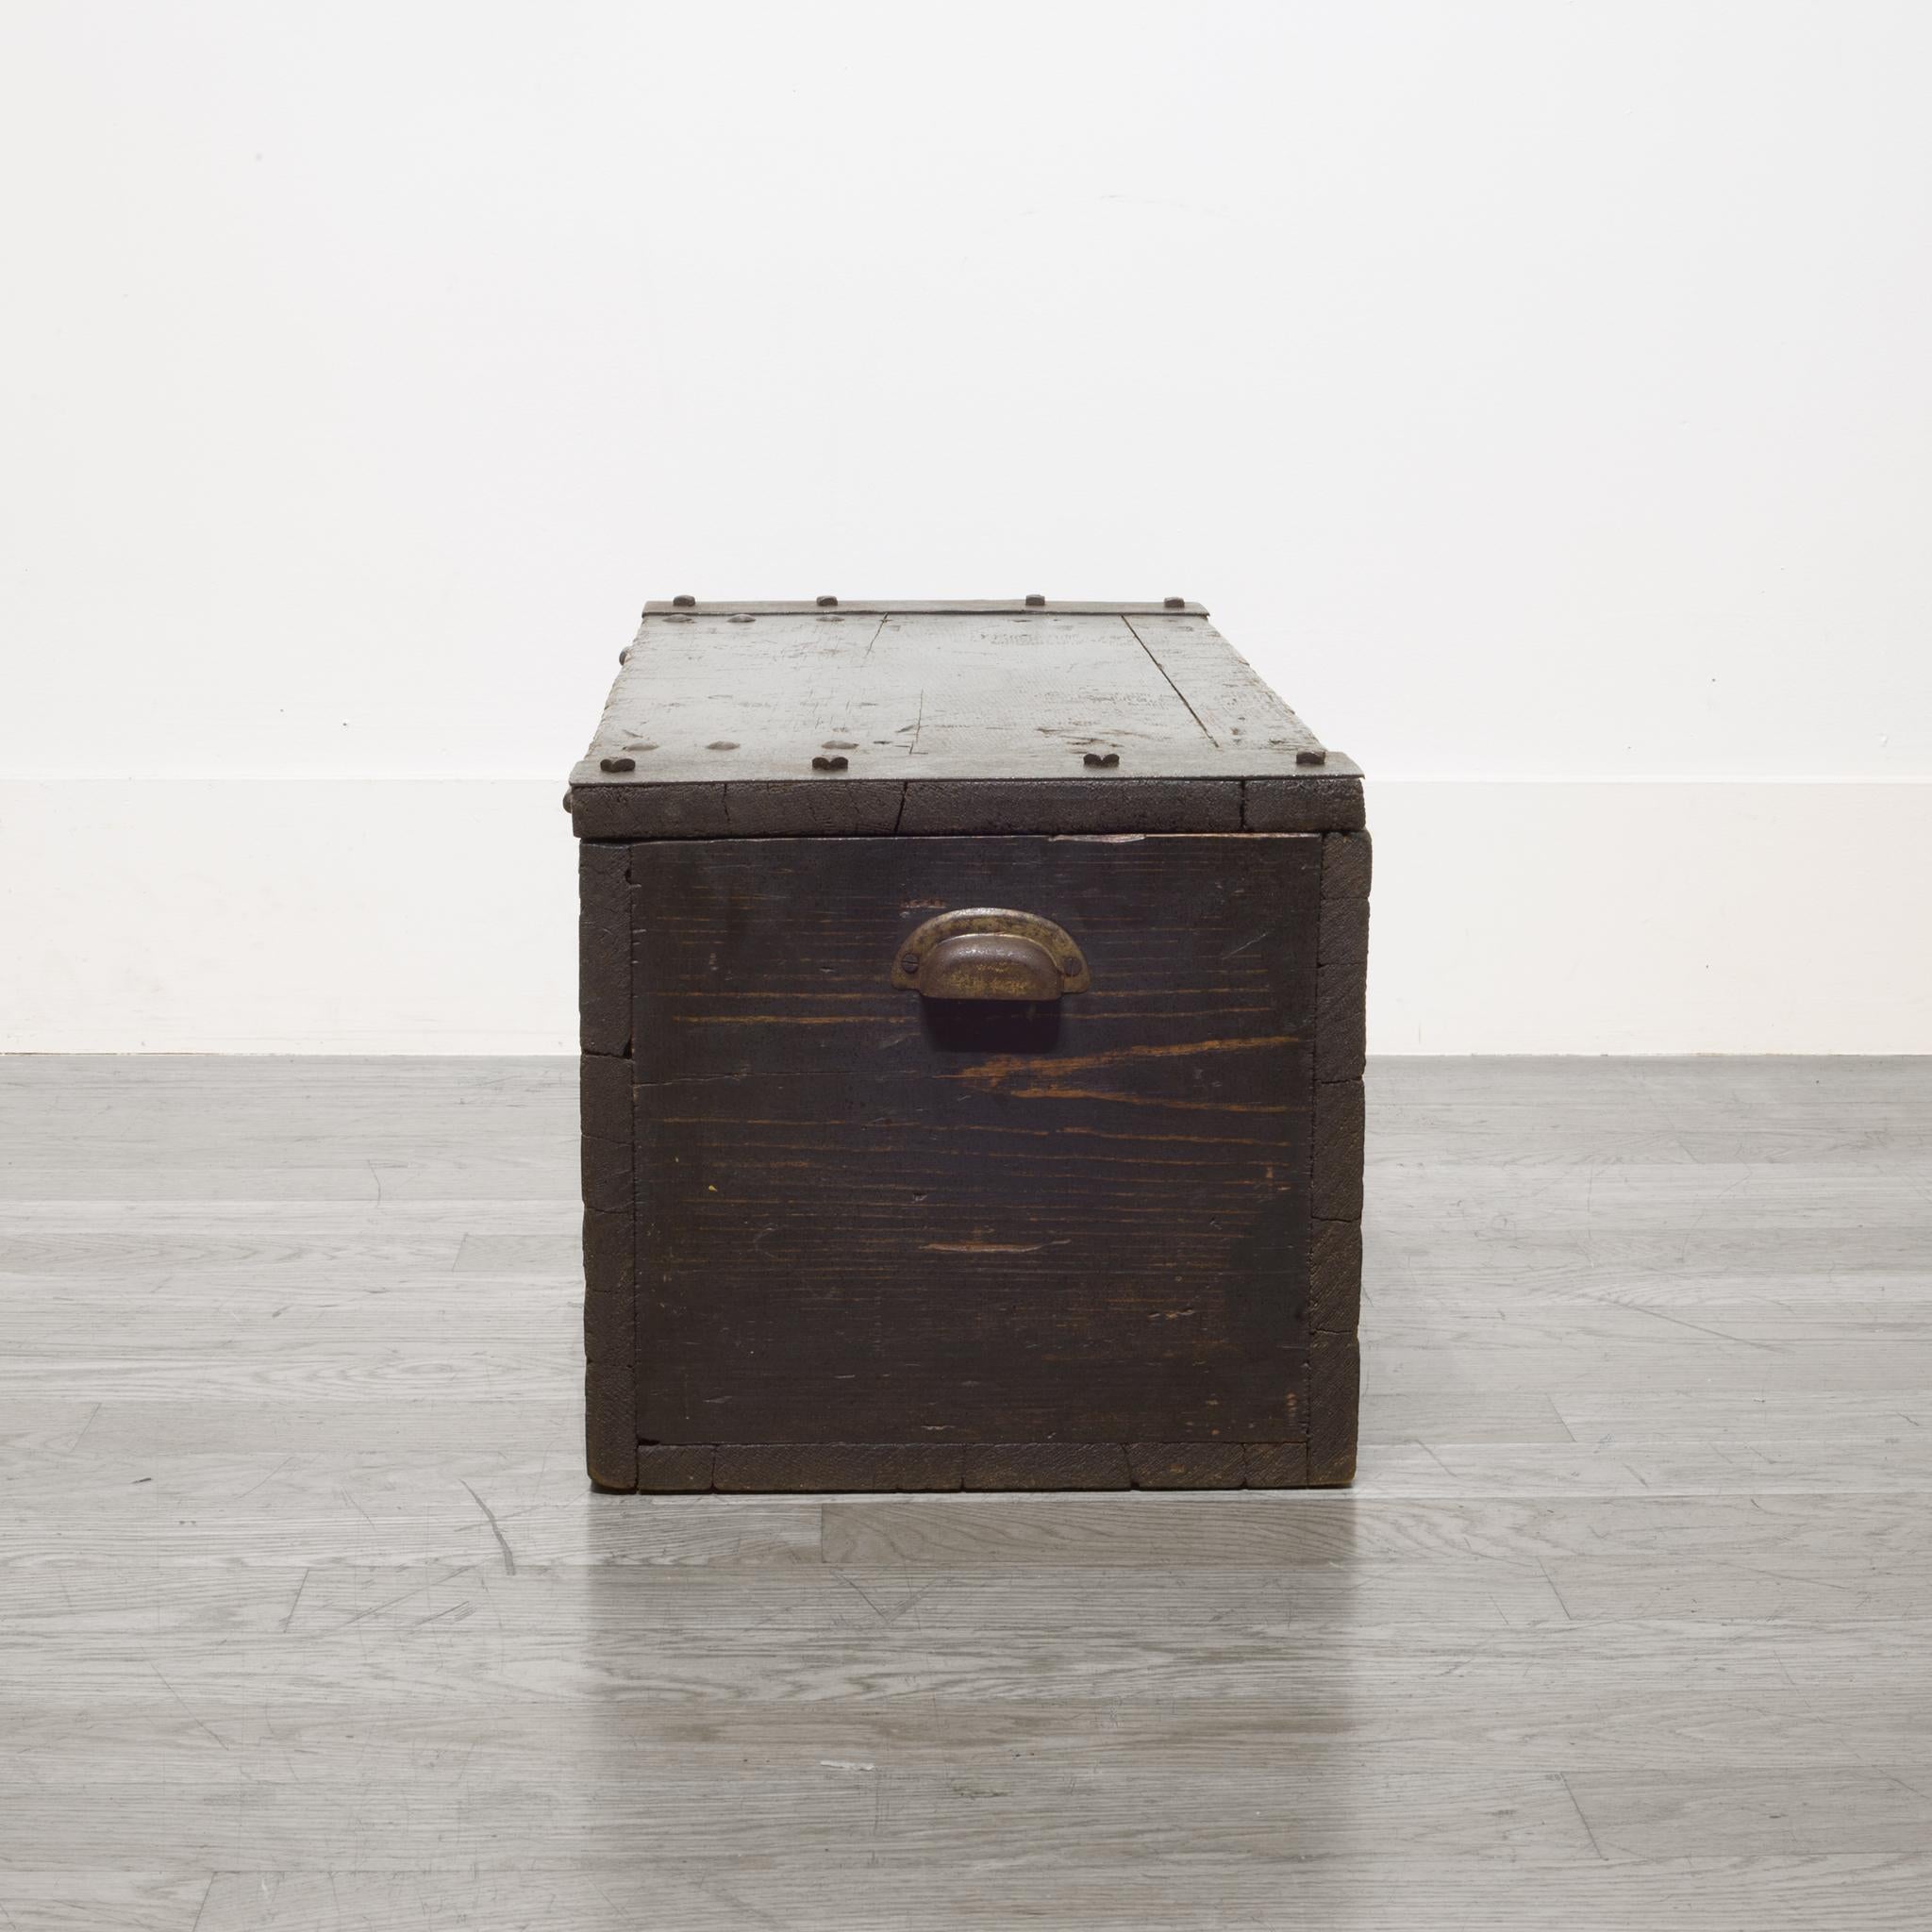 Metal Early 20th Century Handmade Wood and Steel Primitive Chest, circa 1930-1940